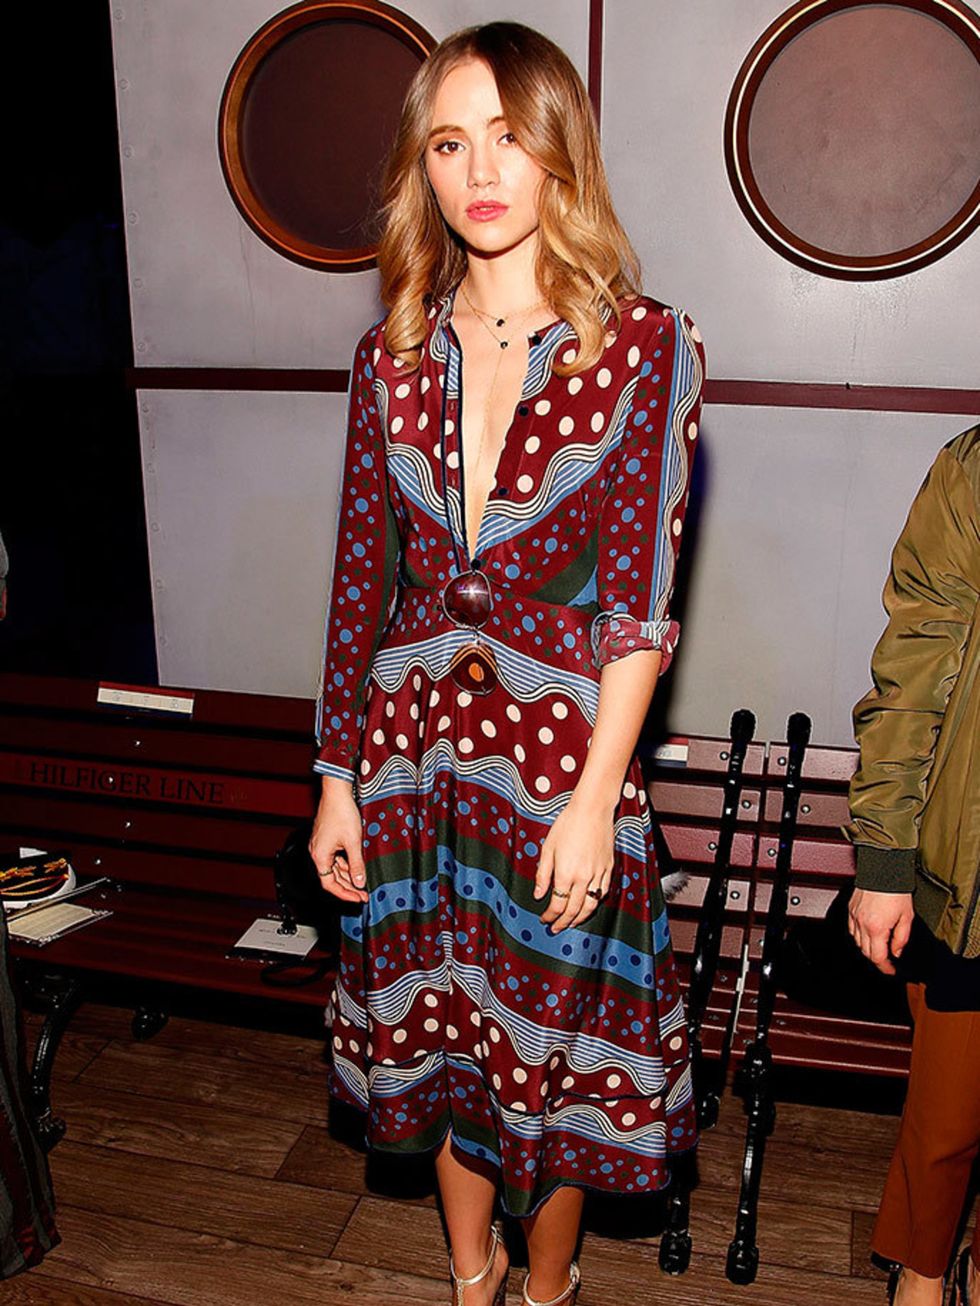 Suki Waterhouse attends the Tommy Hilfiger AW16 show in New York, February 2016.